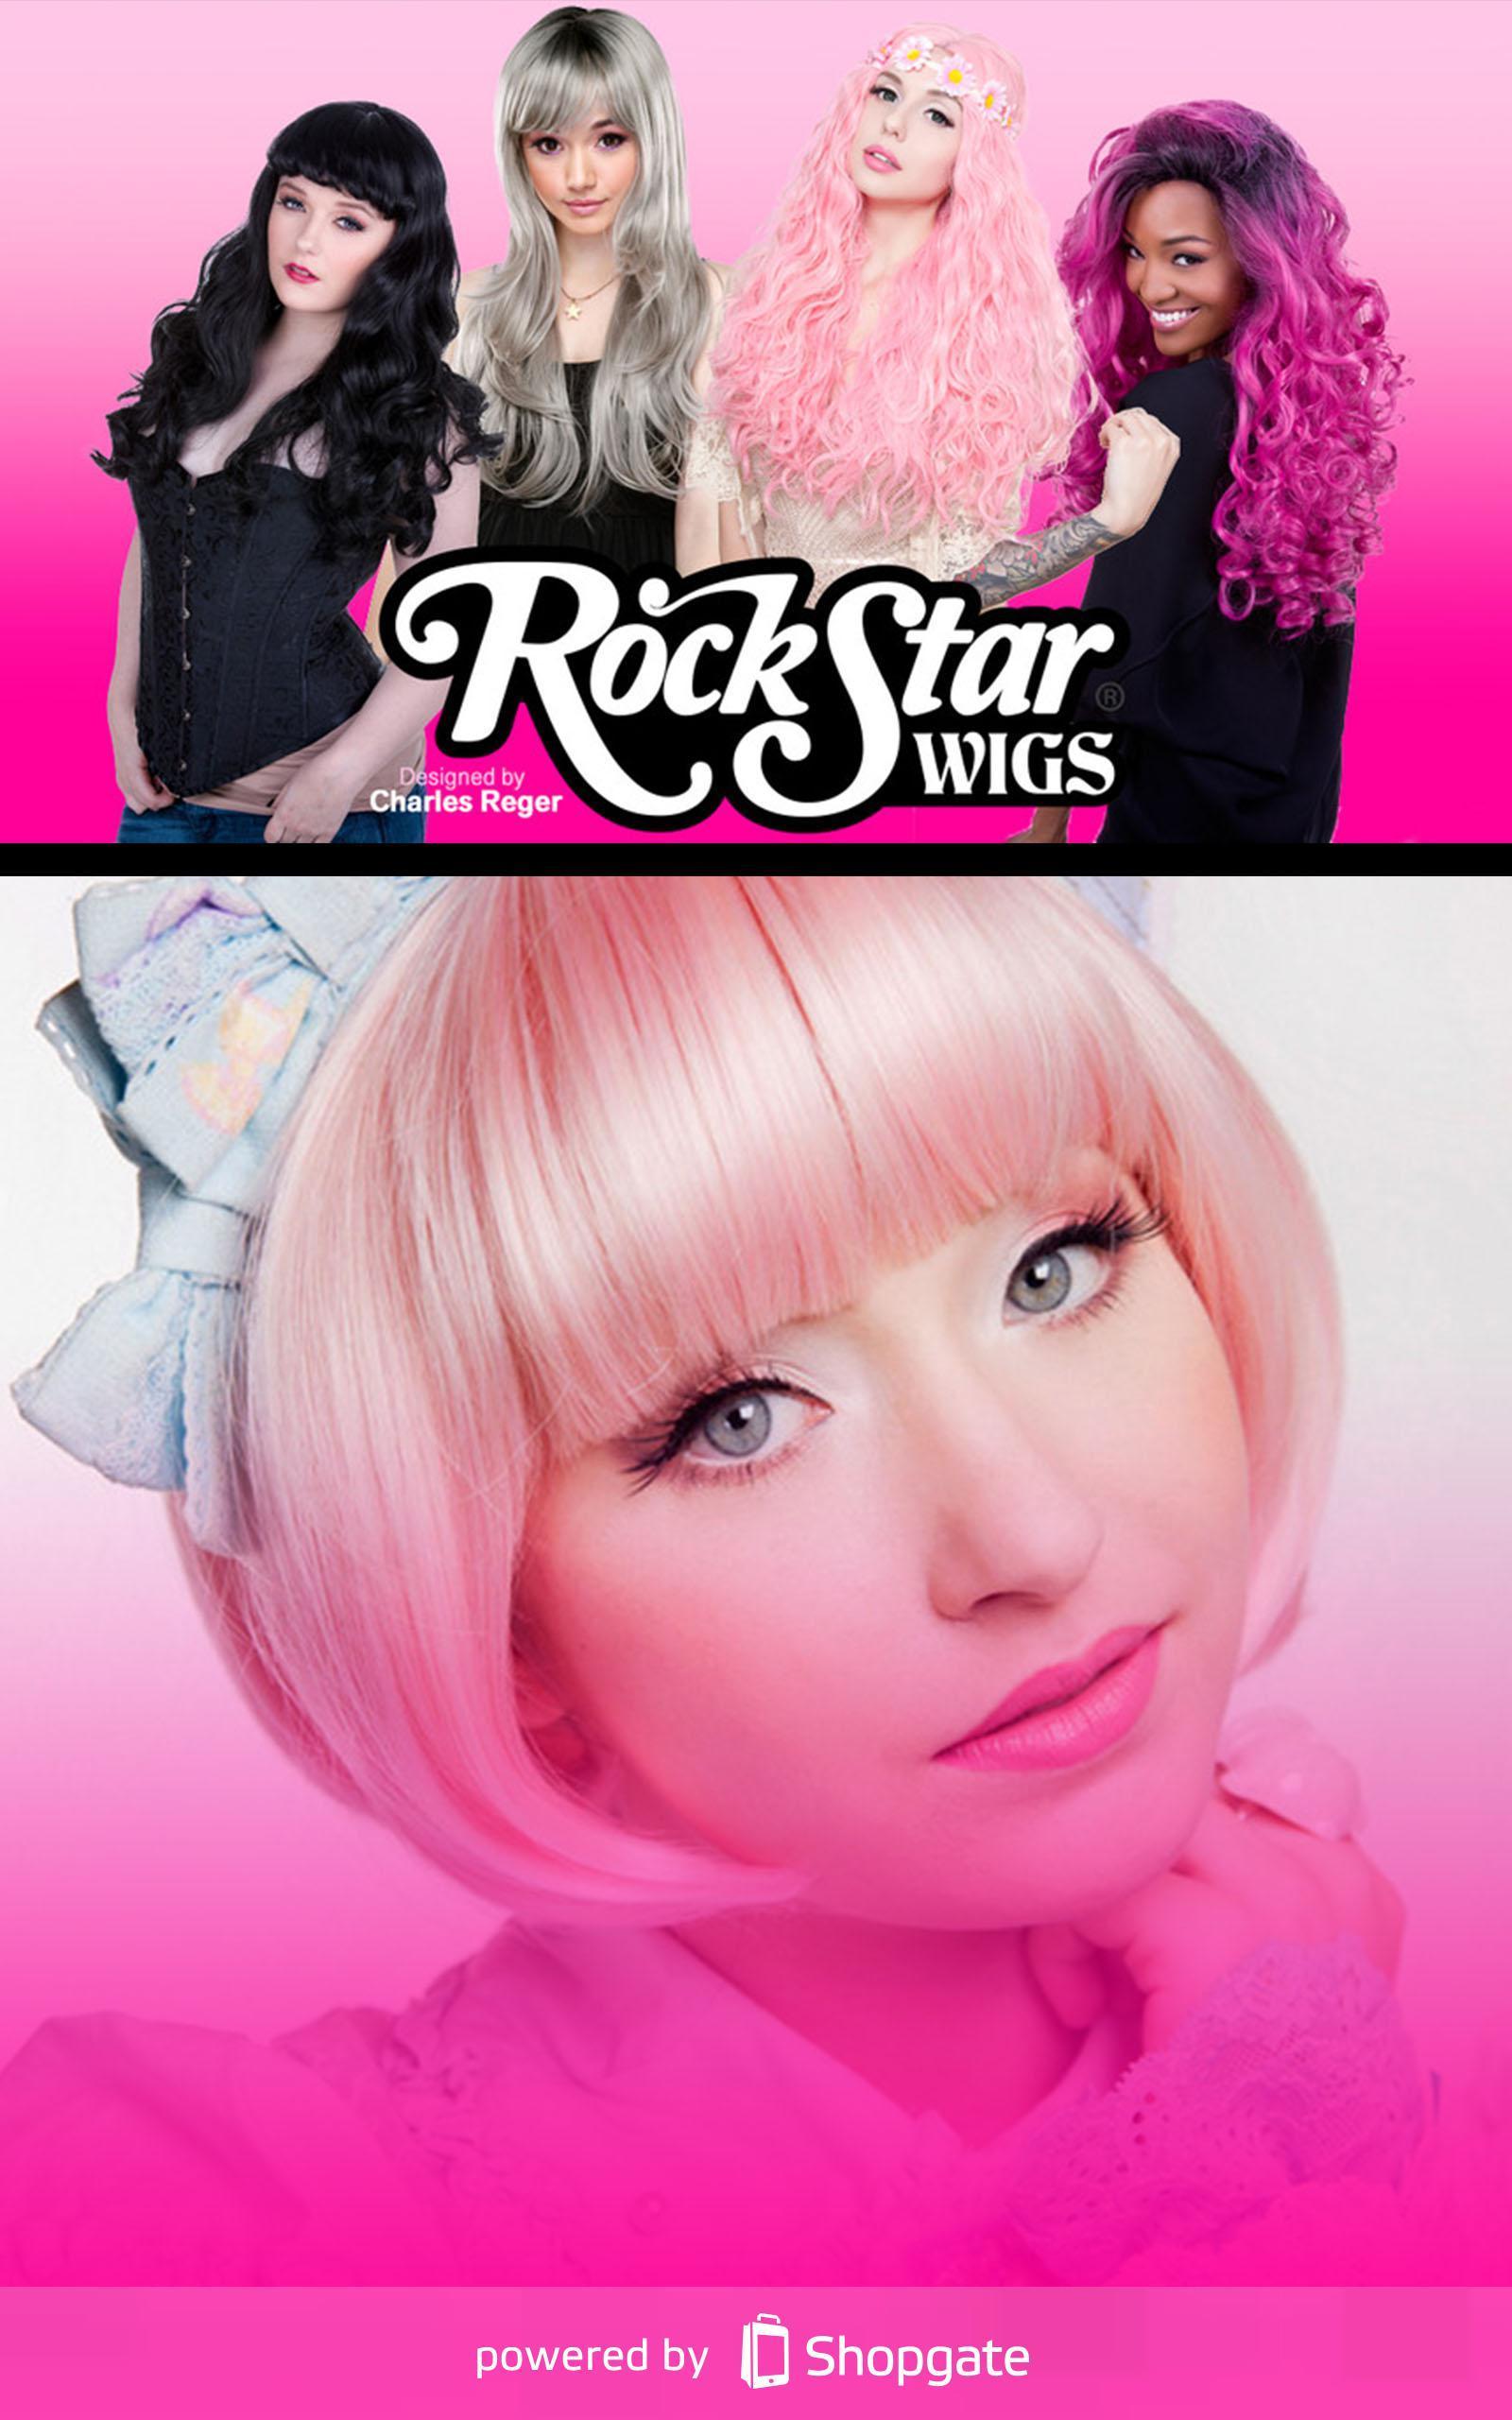 Rockstar Wigs for Android - APK Download